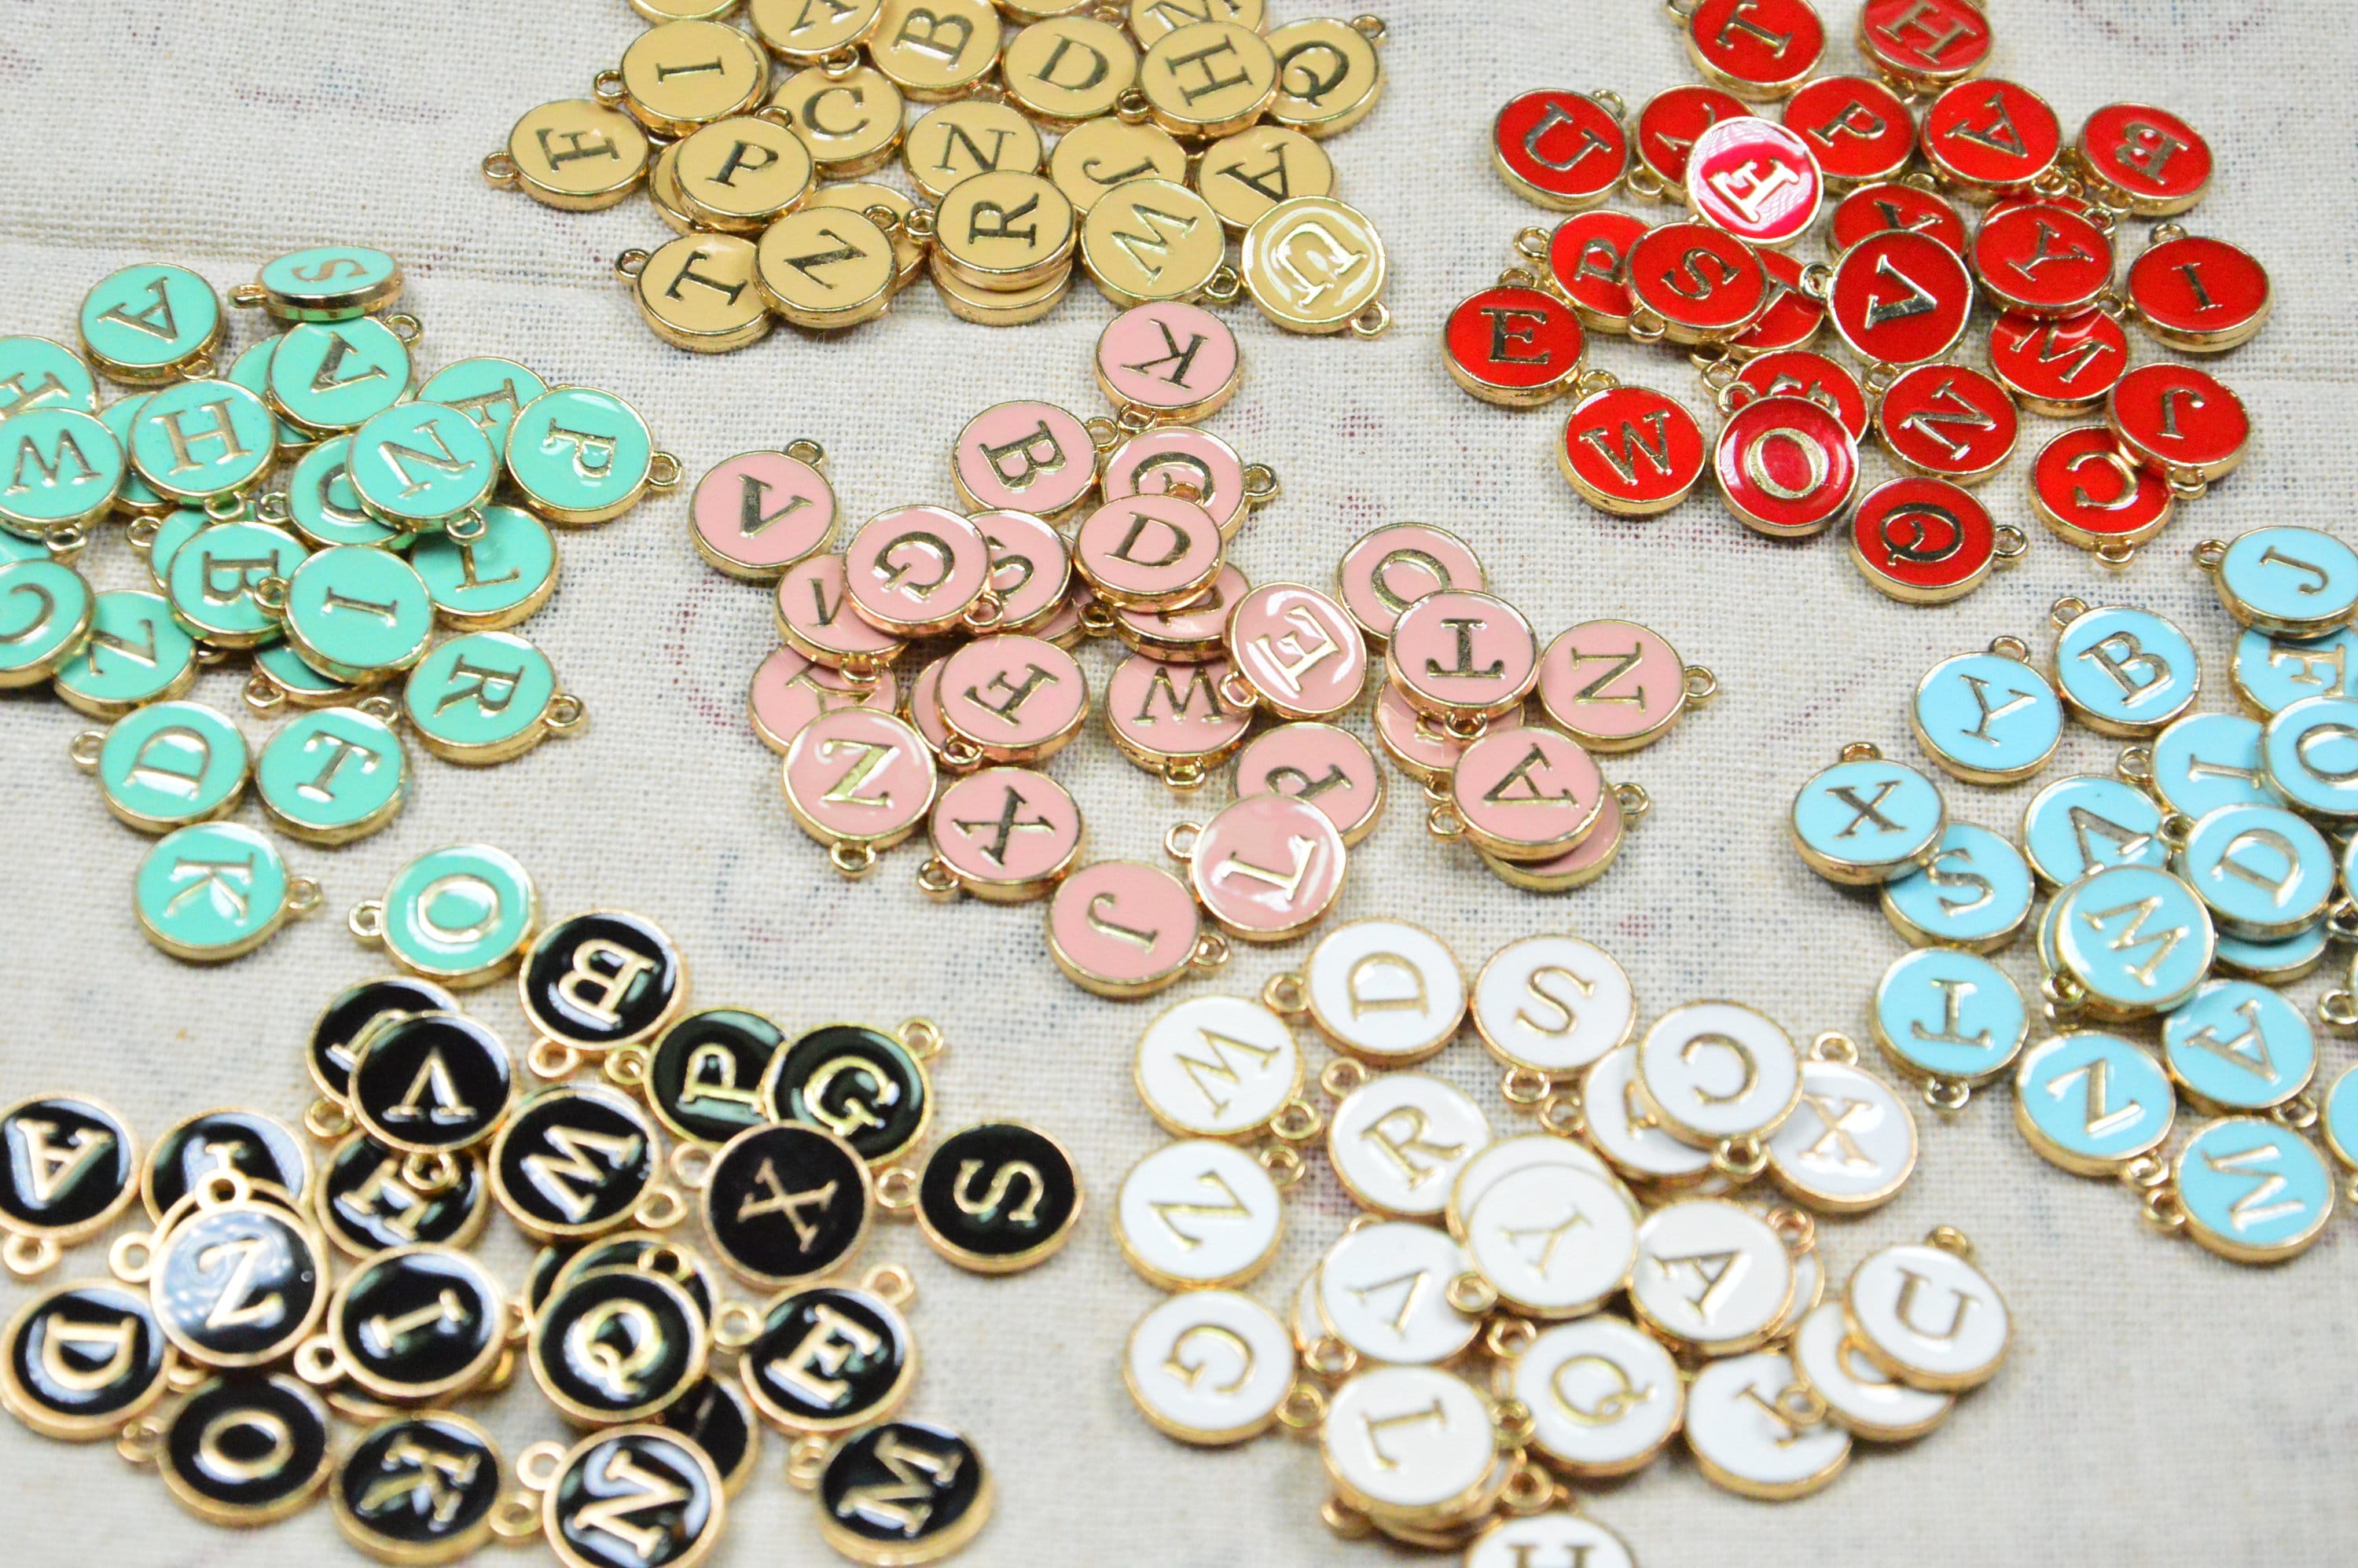 Enamel A Z Alphabet Initial Letter Alphabet Charms Set Of 26 For DIY Jewelry  Making From Shuiyan168, $2.5